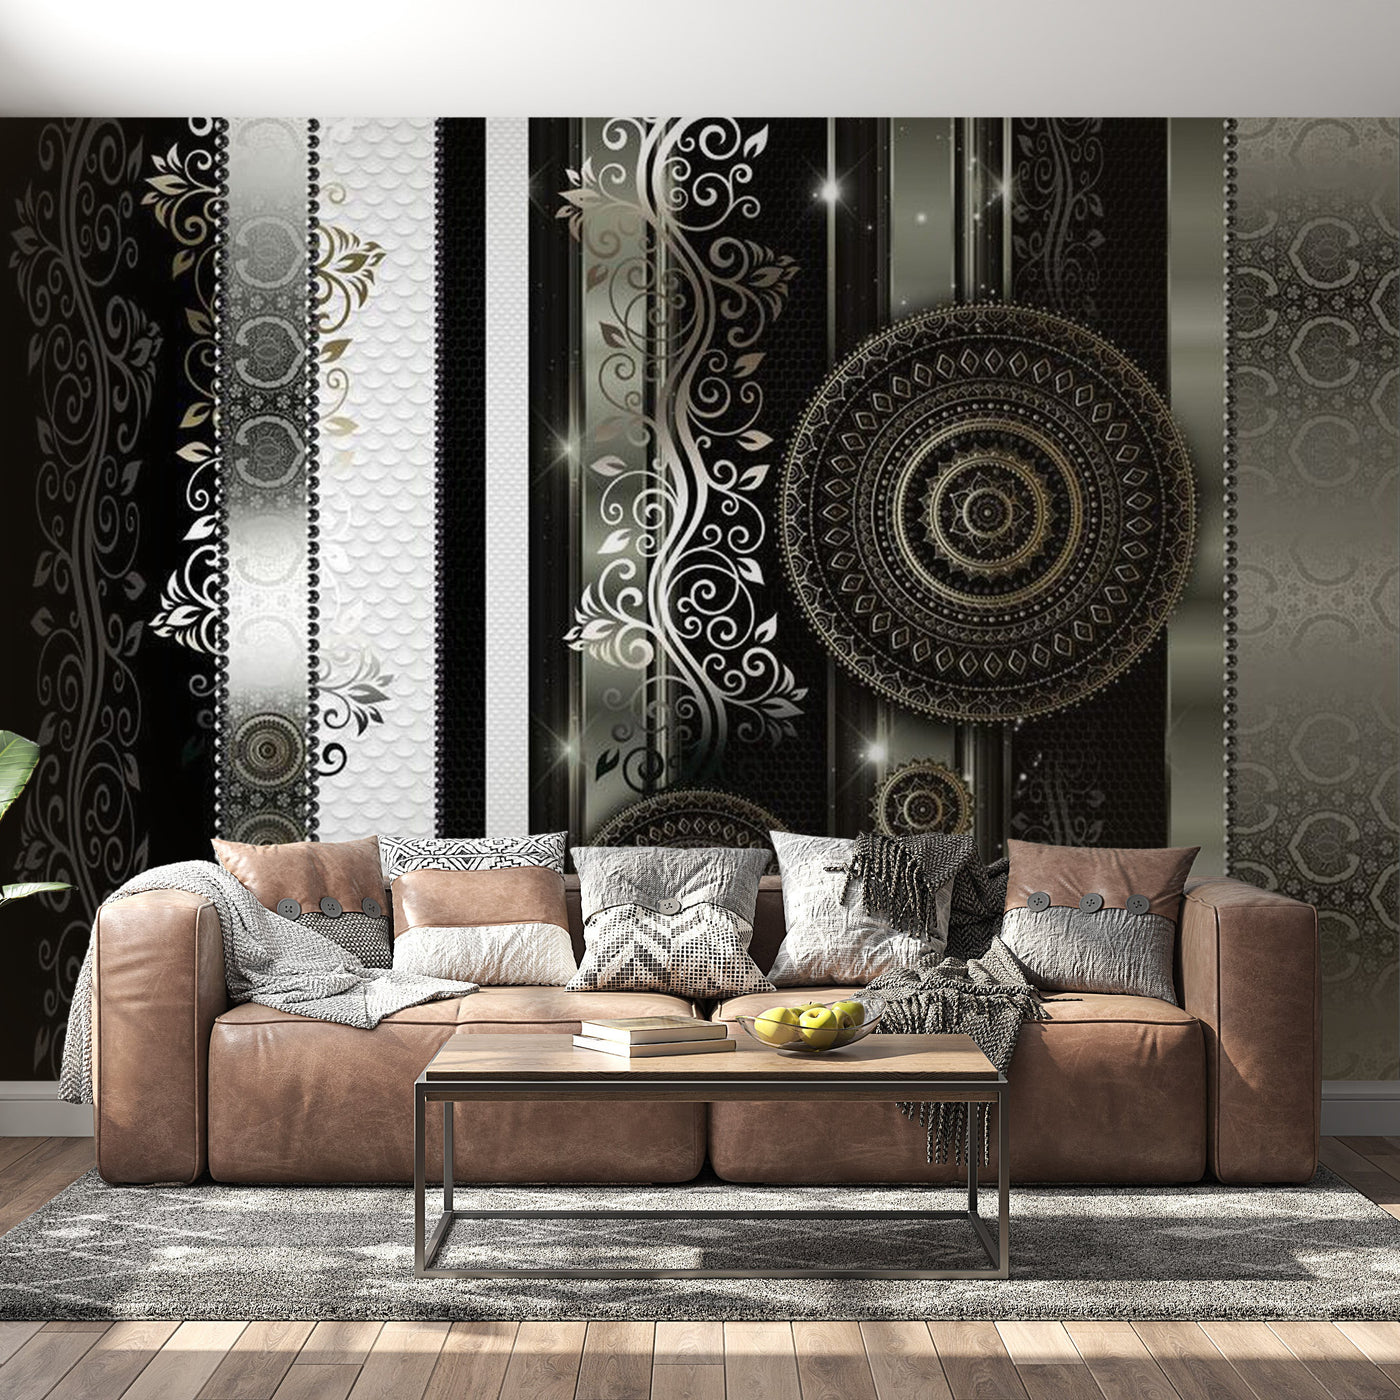 Peel & Stick Glam Wall Mural - Harmony Of Despair - Removable Wall Decals